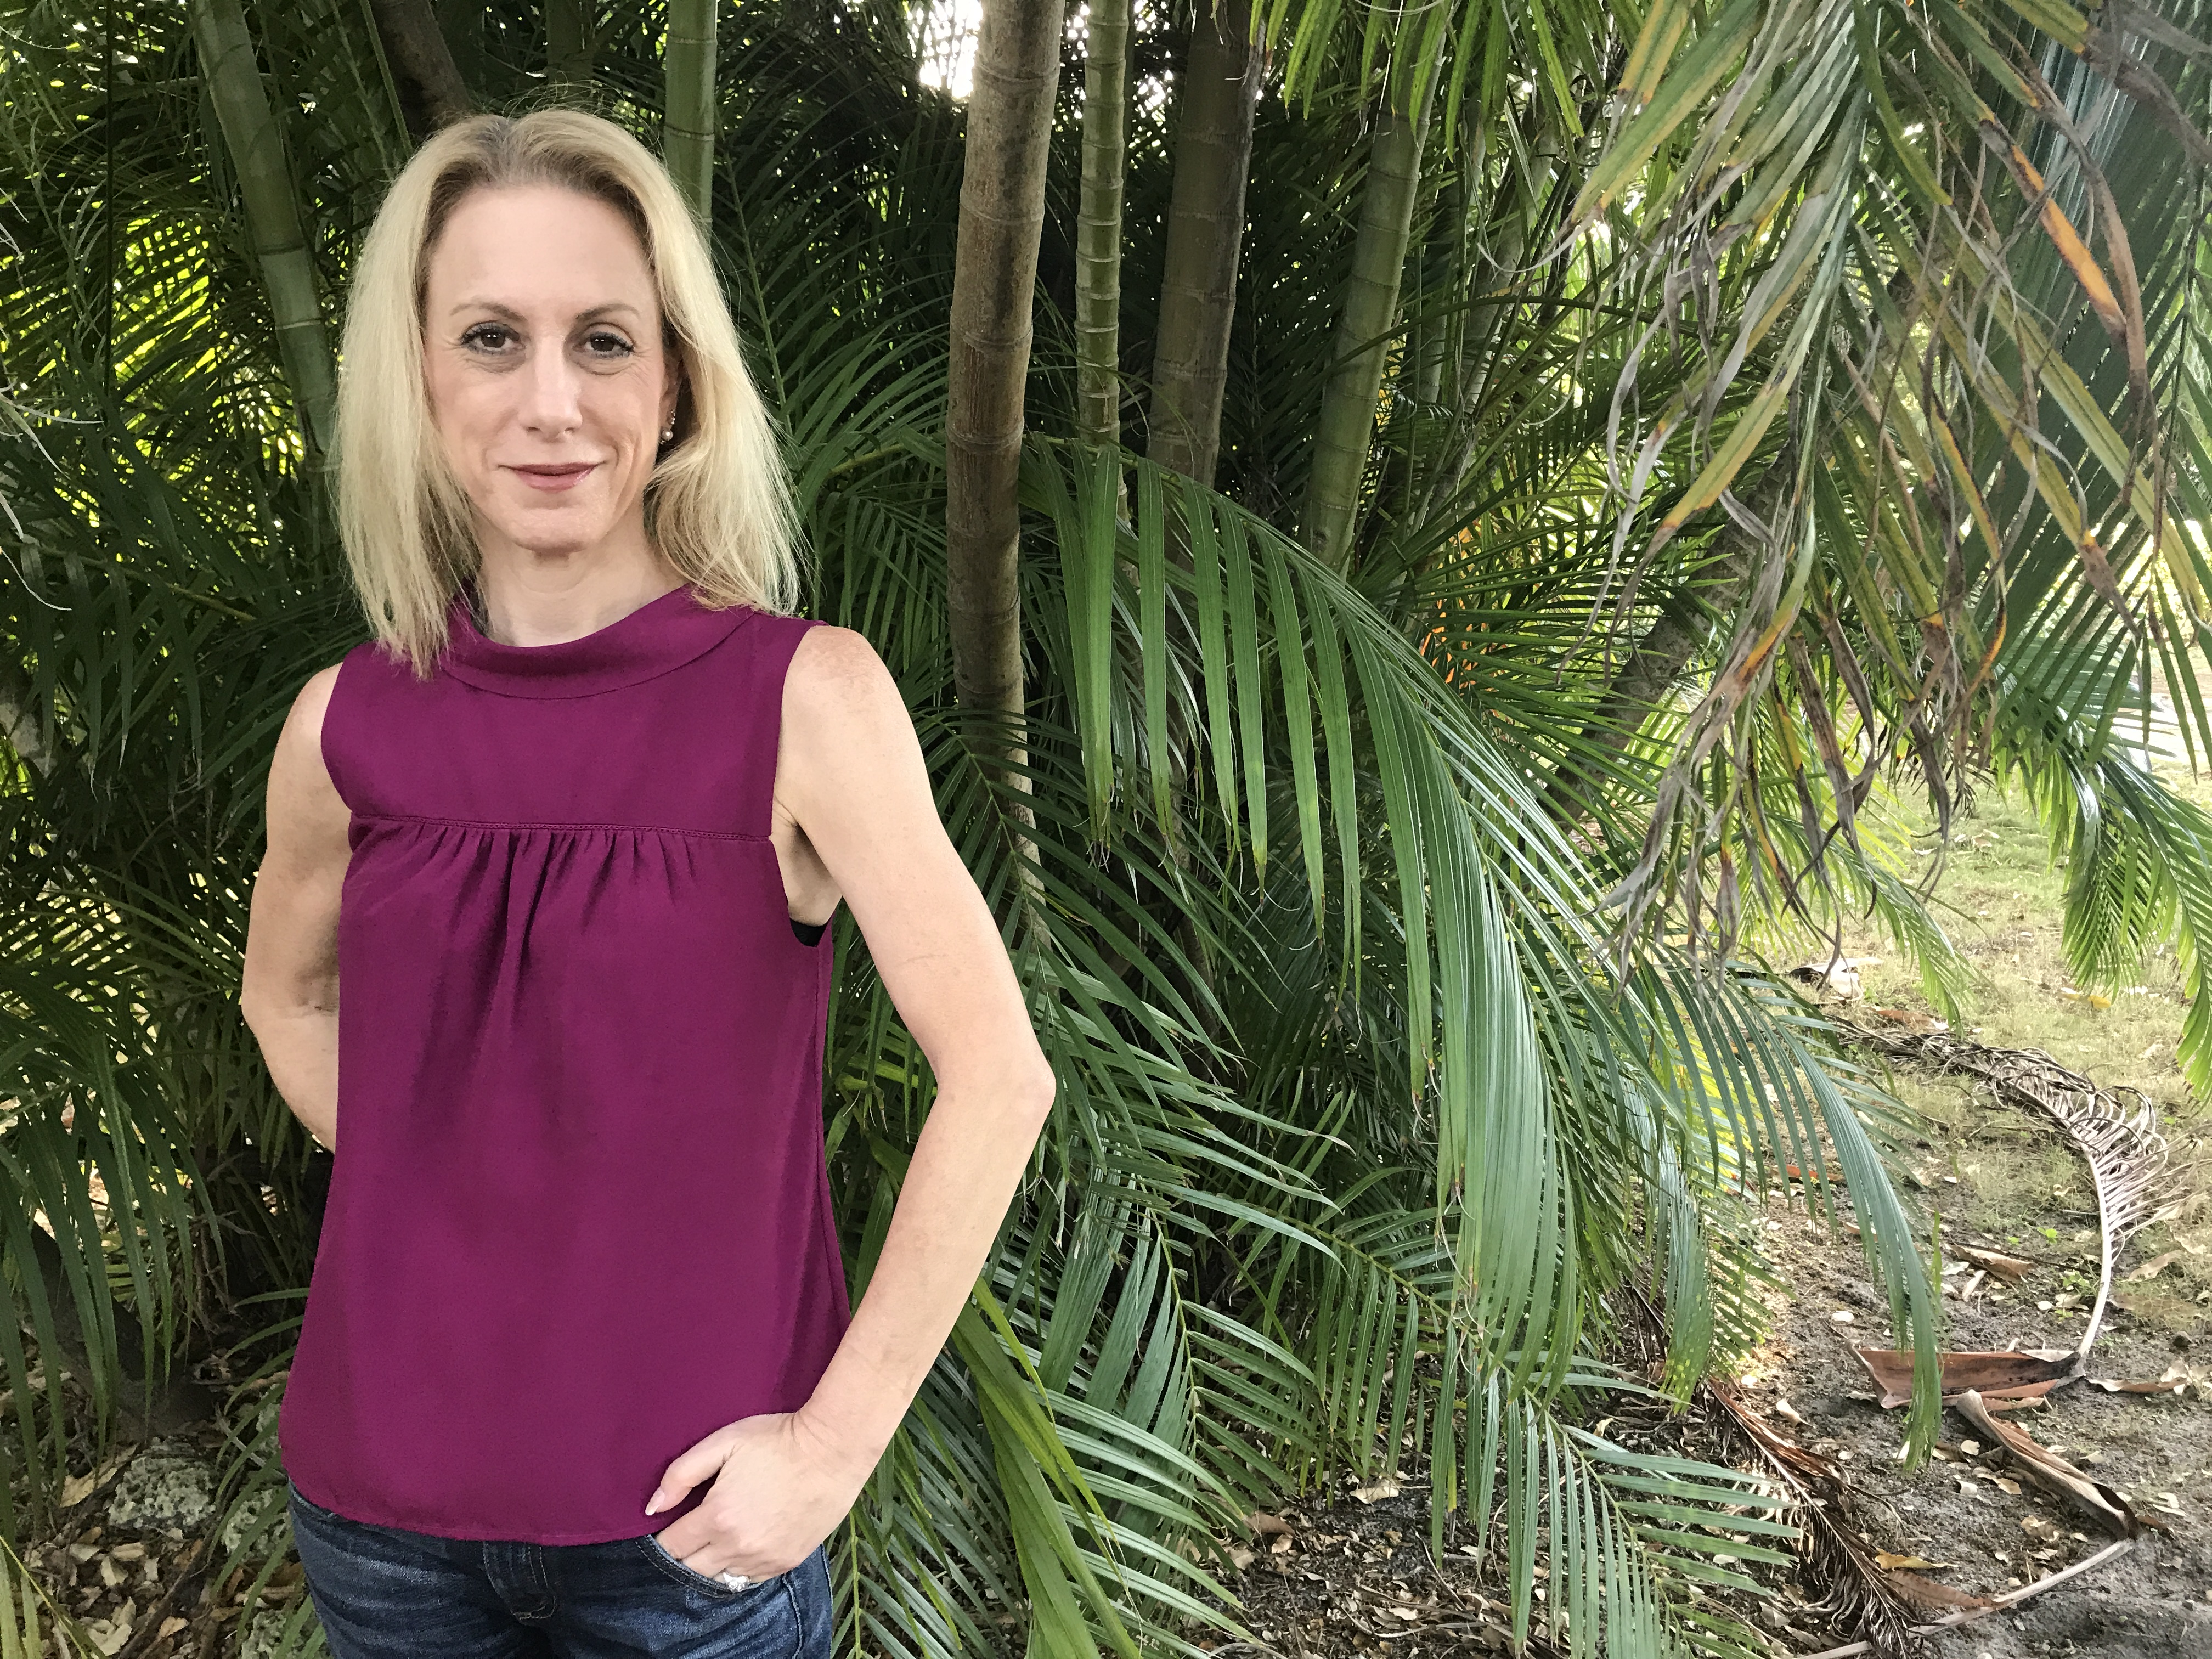 Jen is a Causasian woman with blond shoulder-length hair wearing a sleeveless magenta blouse. She is smiling and standing in front of tropical foliage.